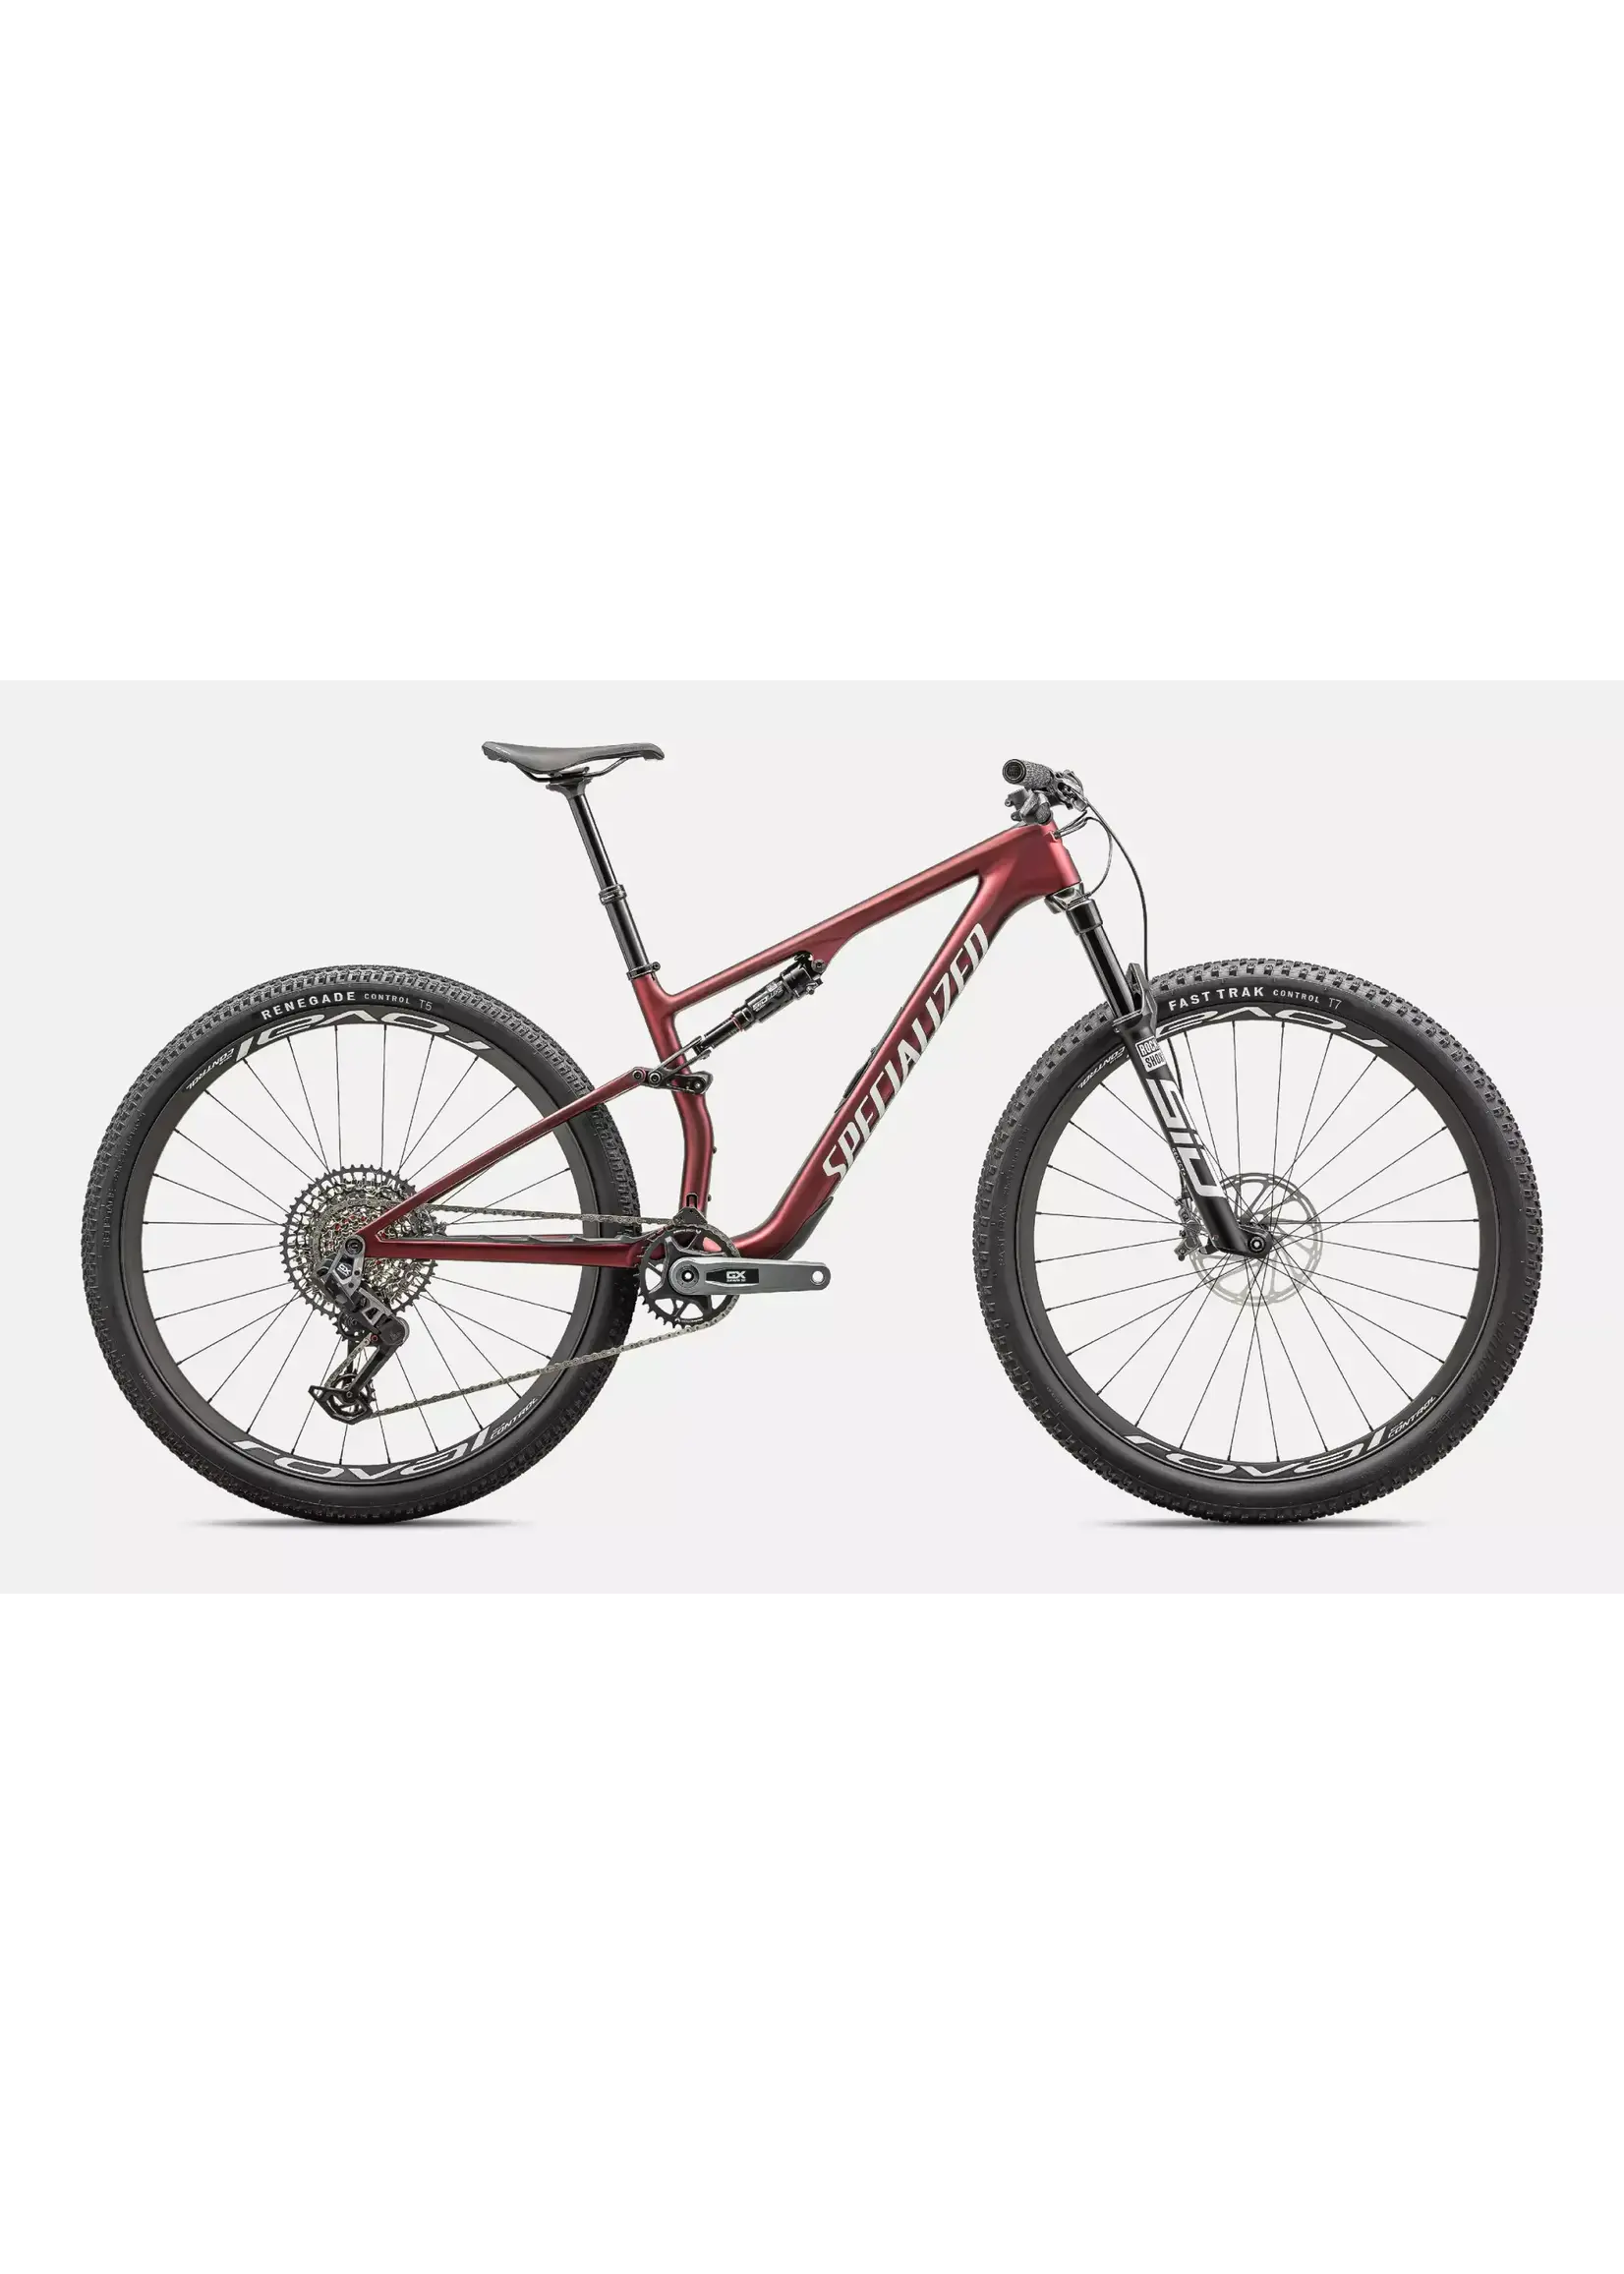 Specialized 24 EPIC 8 EXPERT 29 BIKE